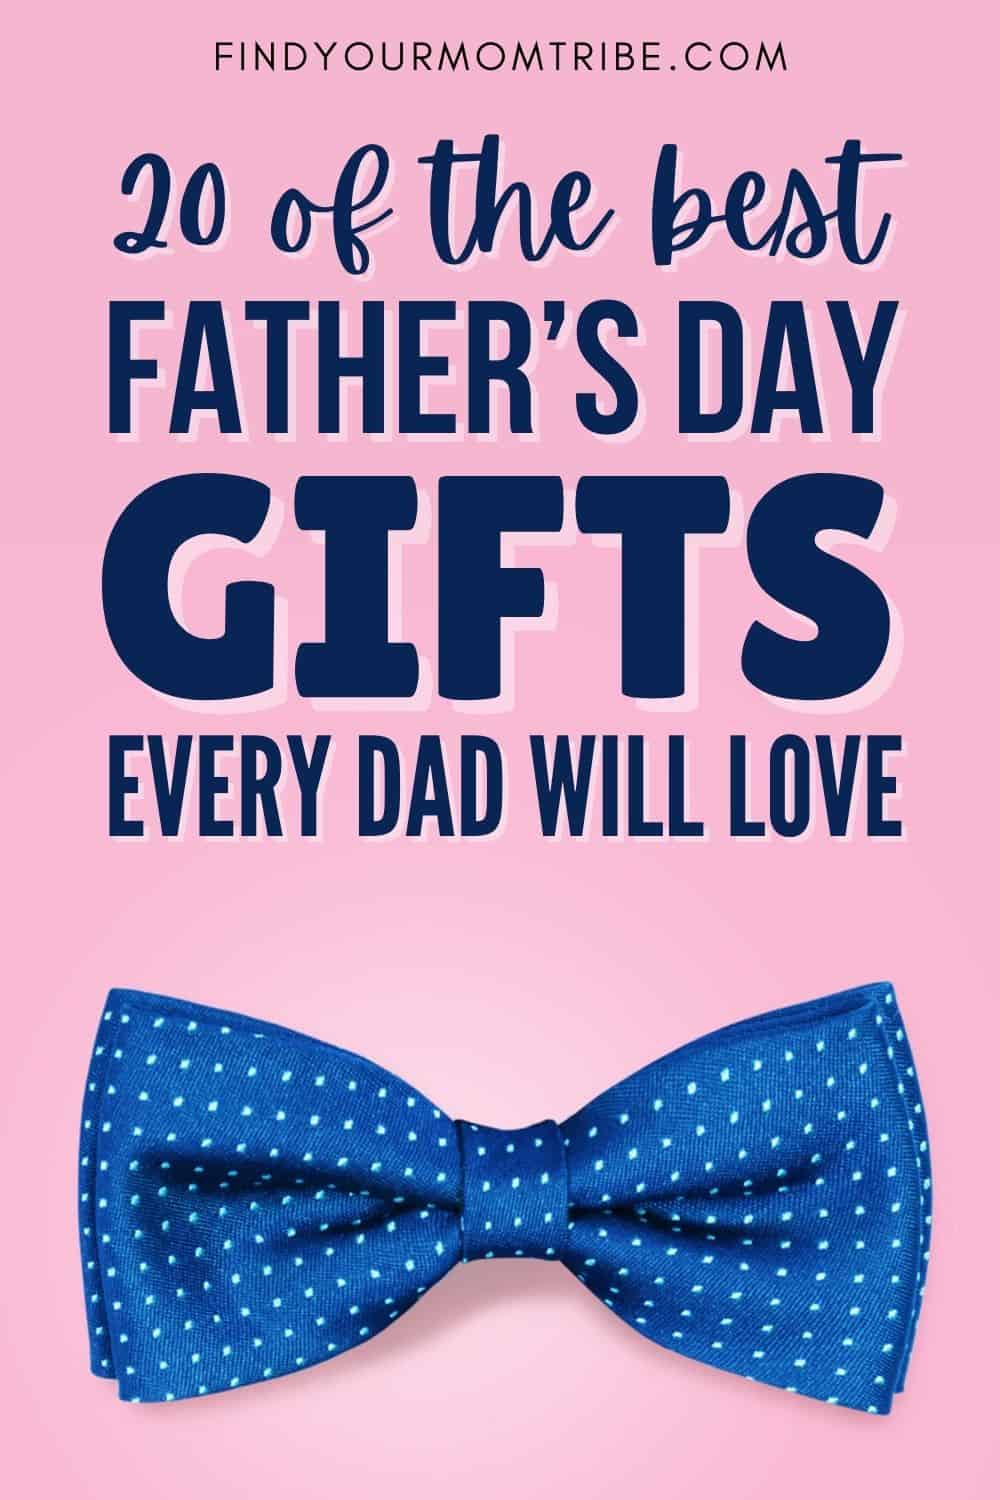 20 Of The Best Father’s Day Gifts Every Dad Will LOVE